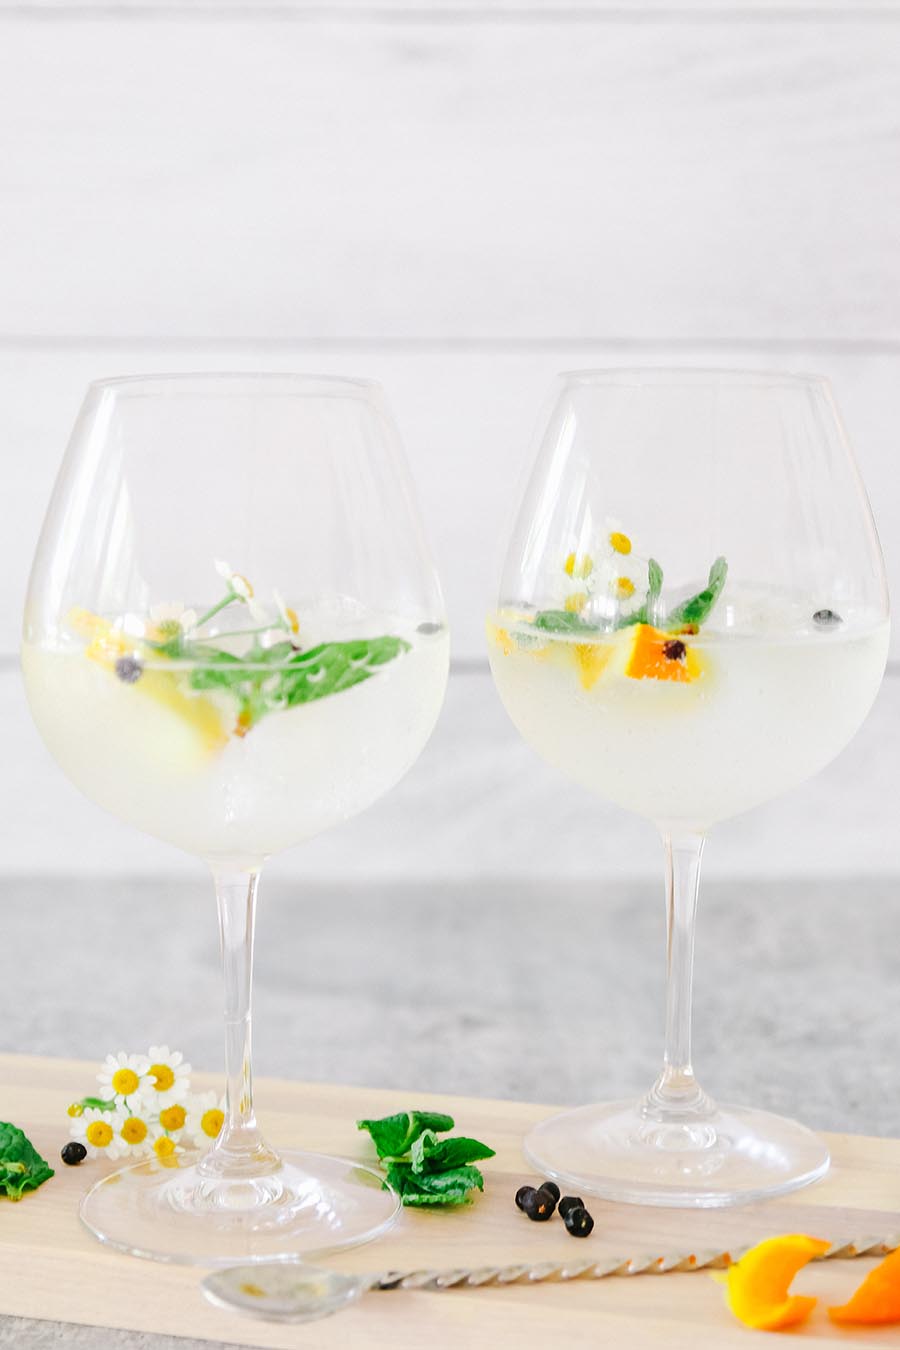 Spanish style gin and tonic recipe